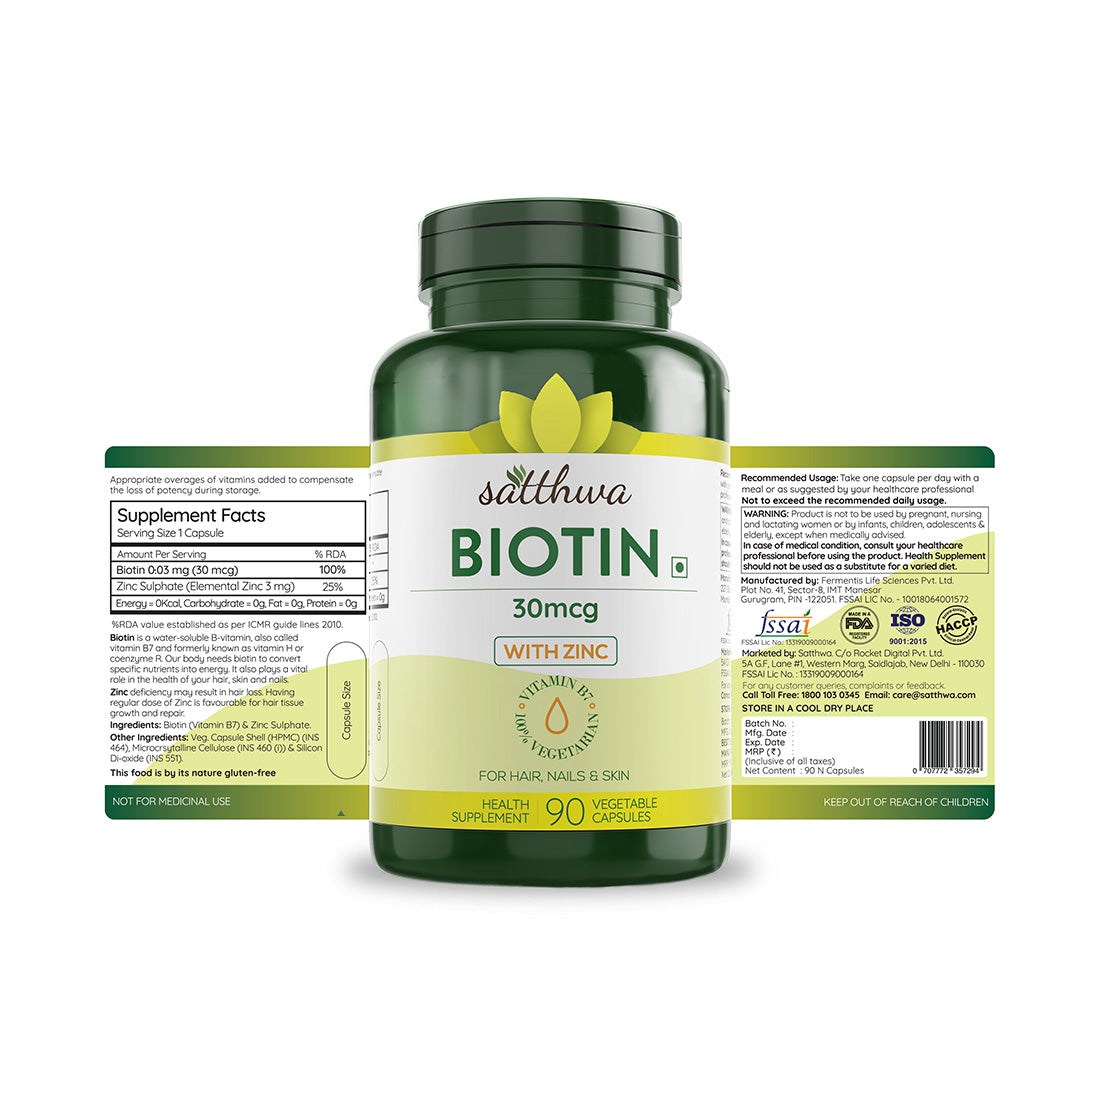 Sprowt Plant Based Hair Growth Biotin Tablets (10000mcg) for Strong, Thick,  Shiny Hair & Healthy Skin: Uses, Price, Dosage, Side Effects, Substitute,  Buy Online